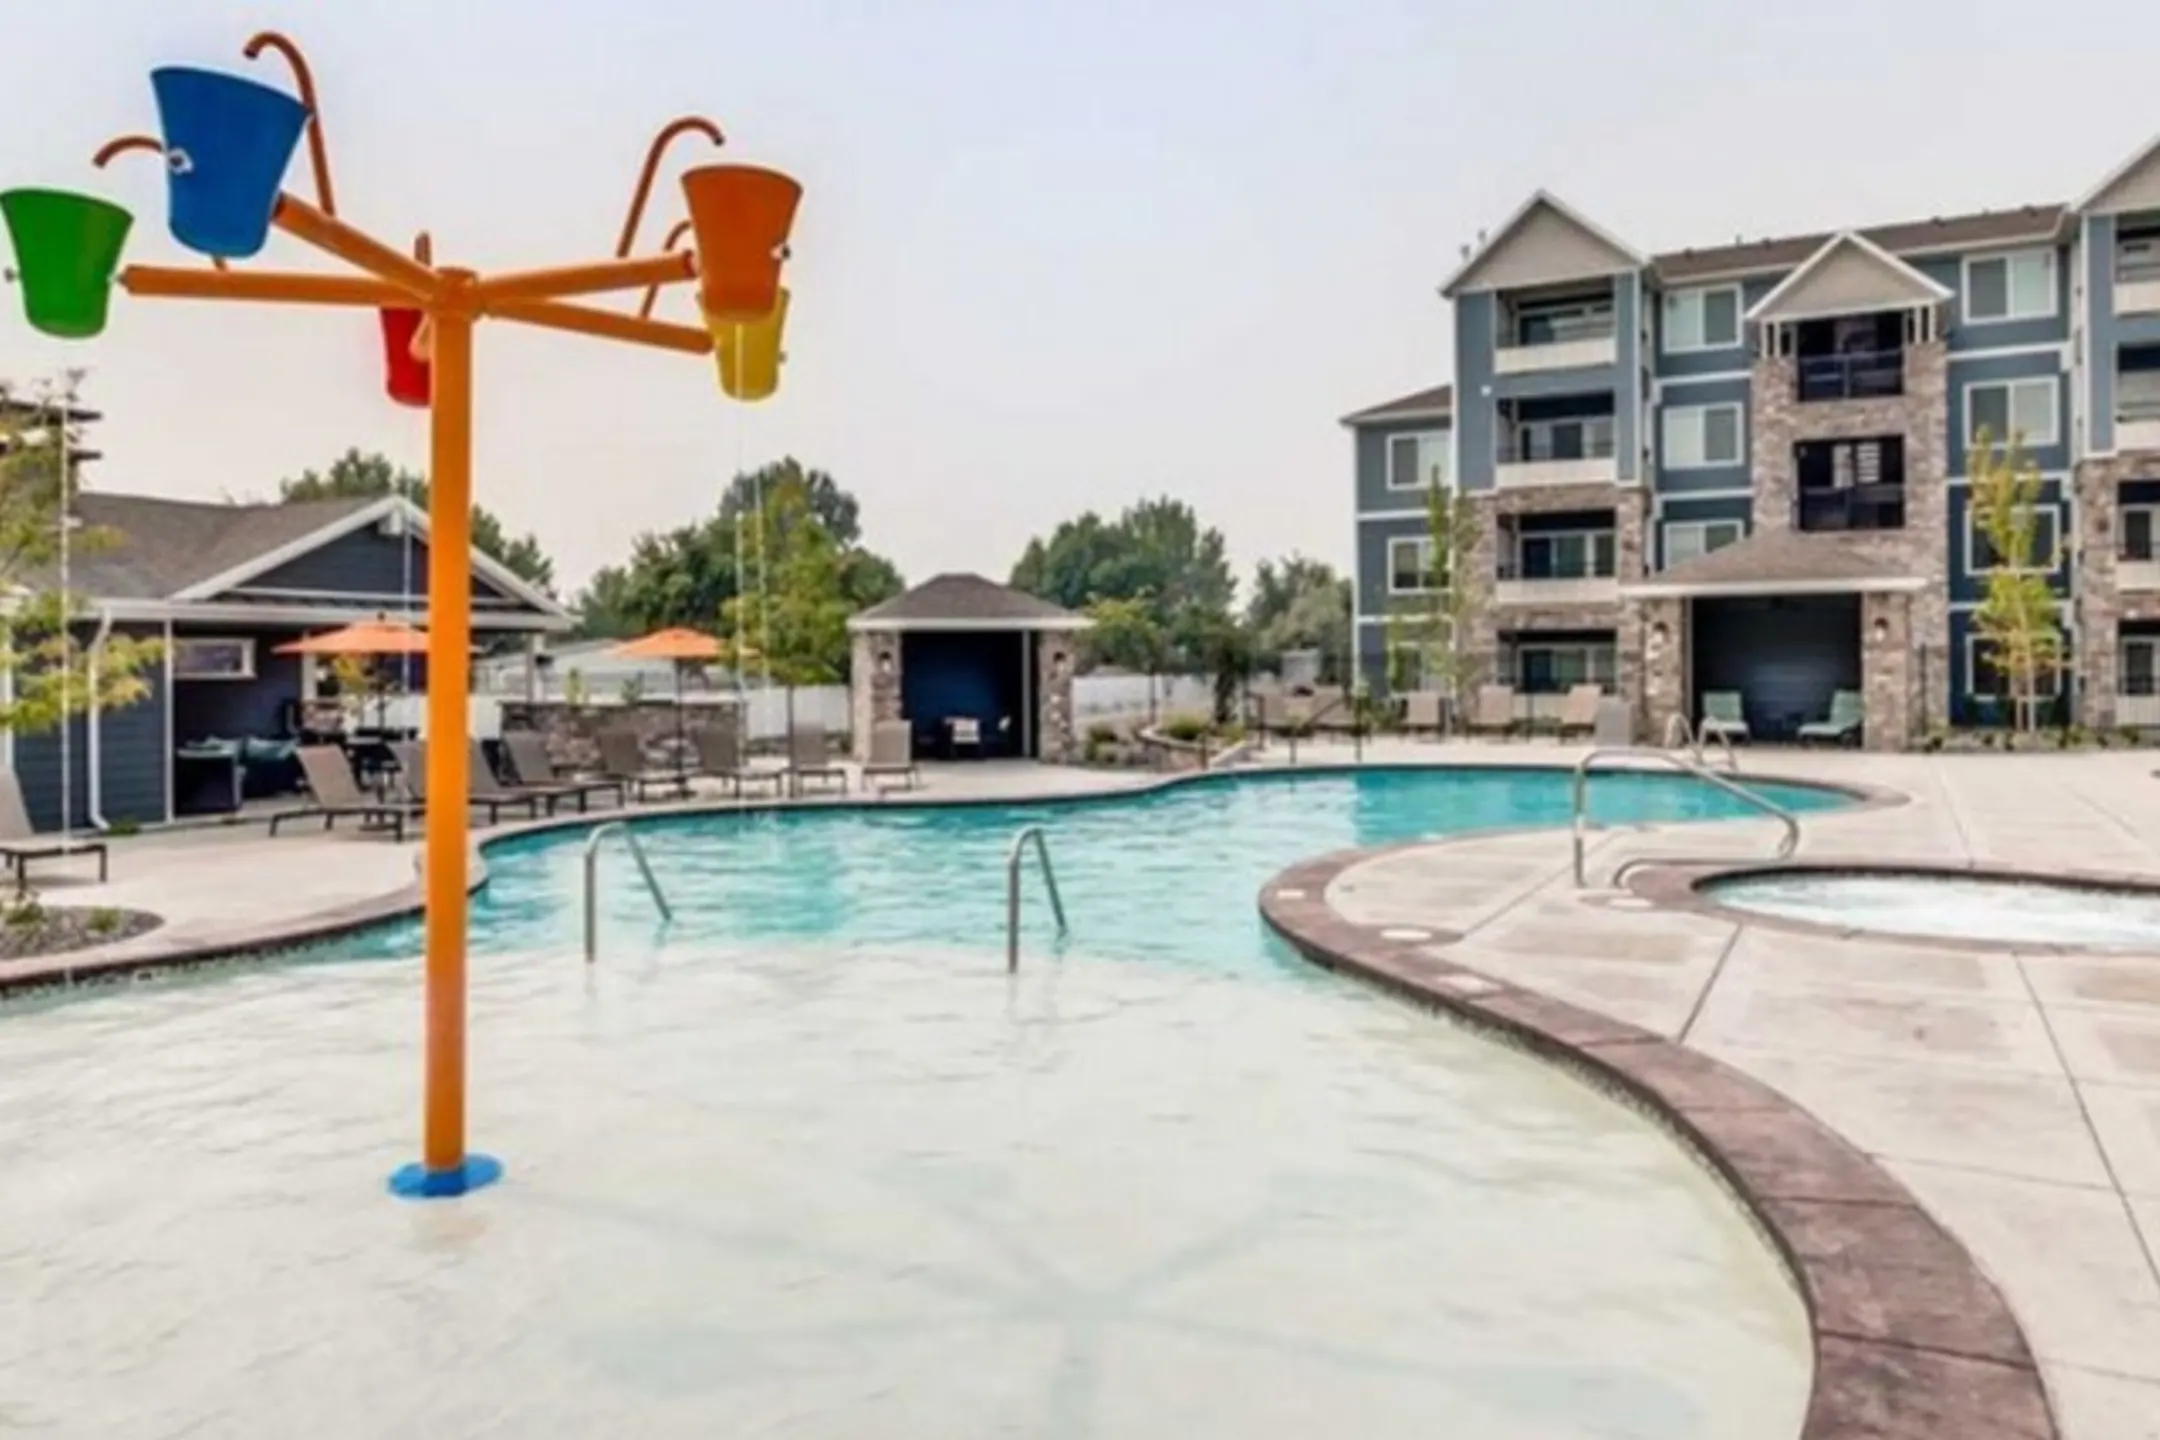 Pool - The Kensington Apartments at North Pointe - Boise, ID